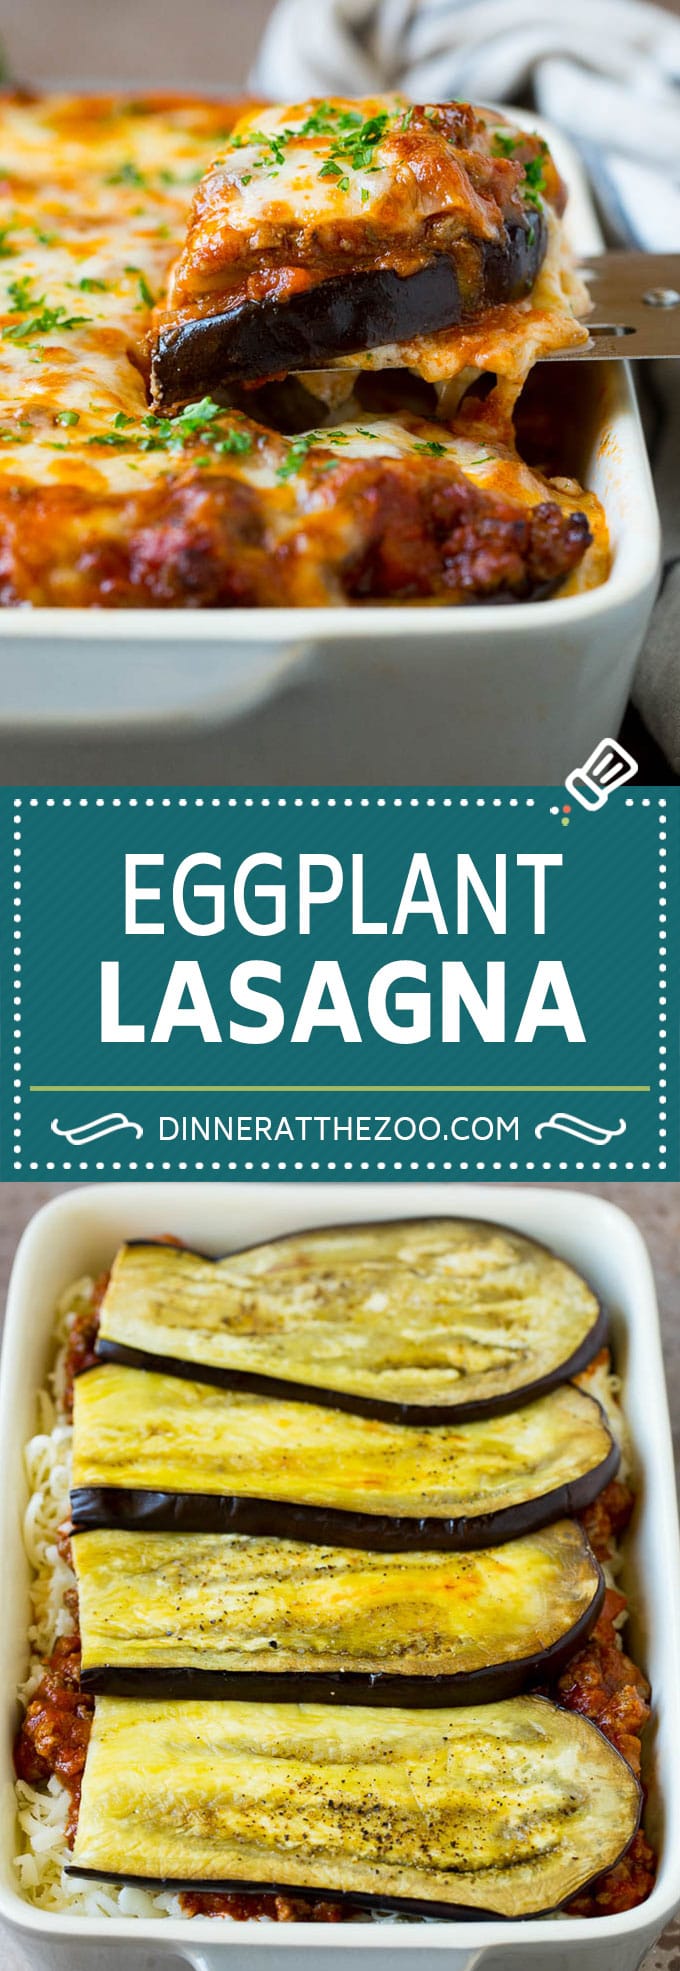 Low carb eggplant lasagna with layers of meat sauce, roasted eggplant and three types of cheese.